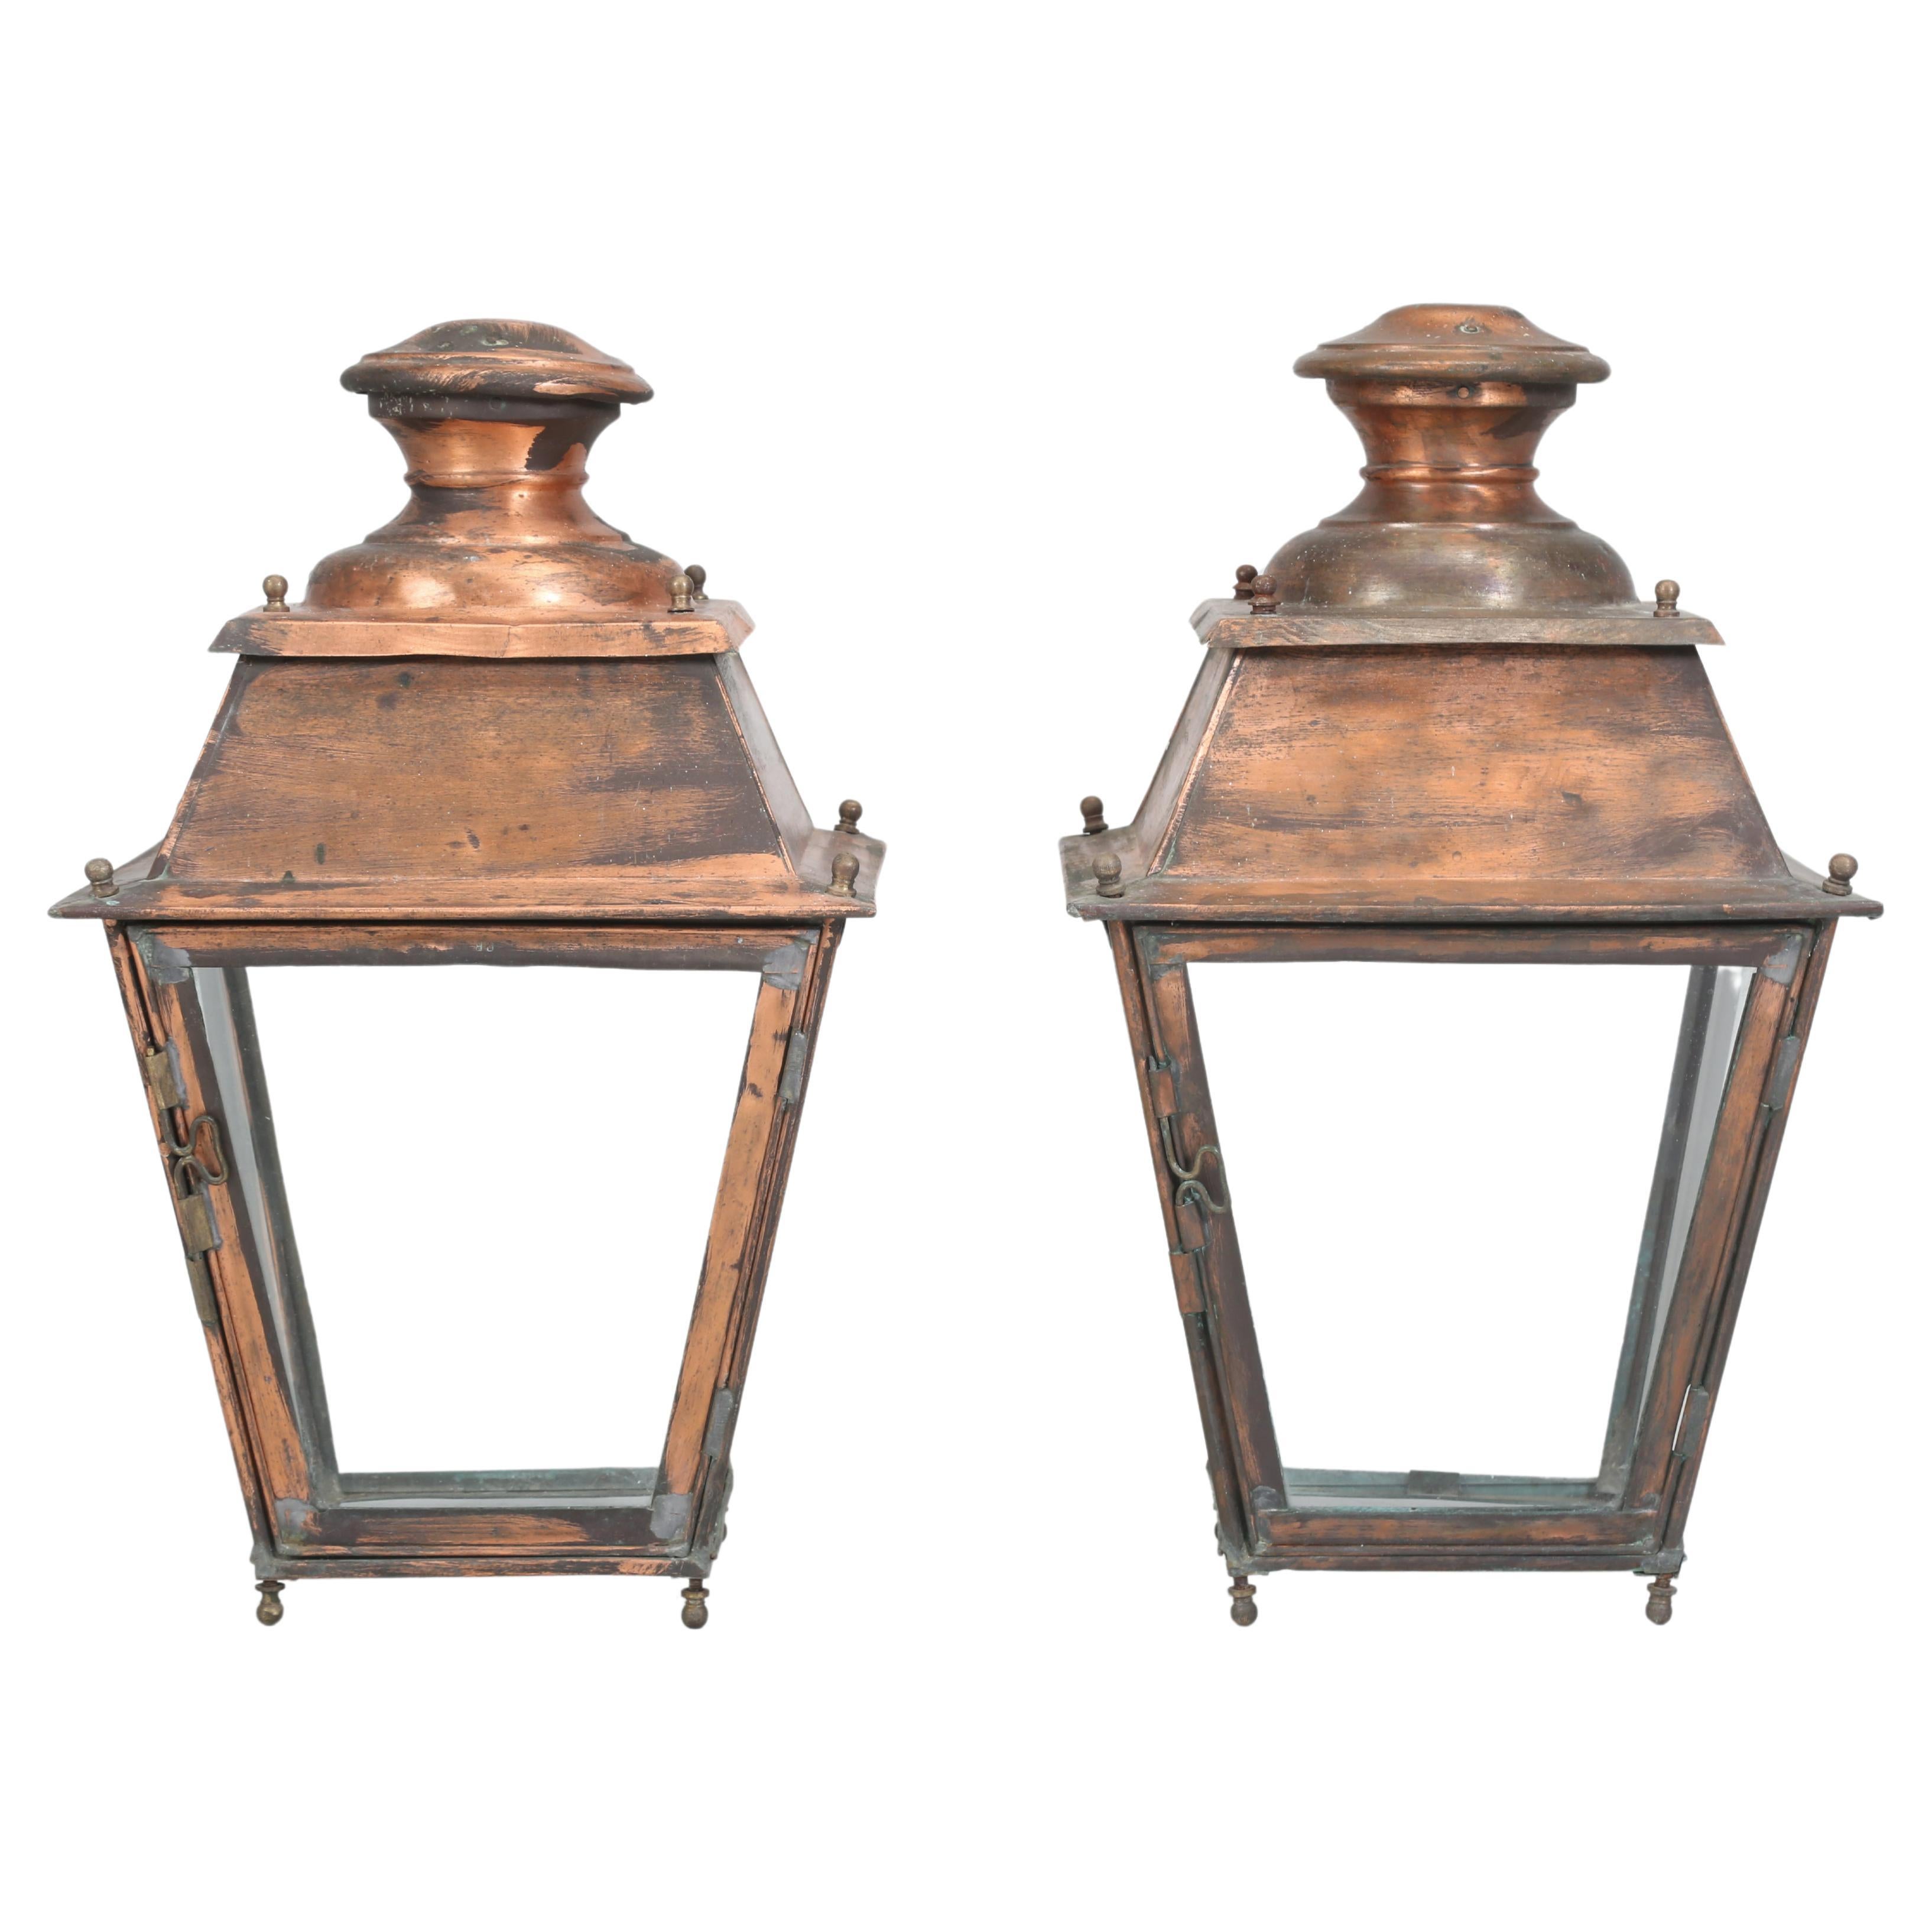 Pair of Vintage French Copper Lanterns from Toulouse France Unrestored Condition For Sale